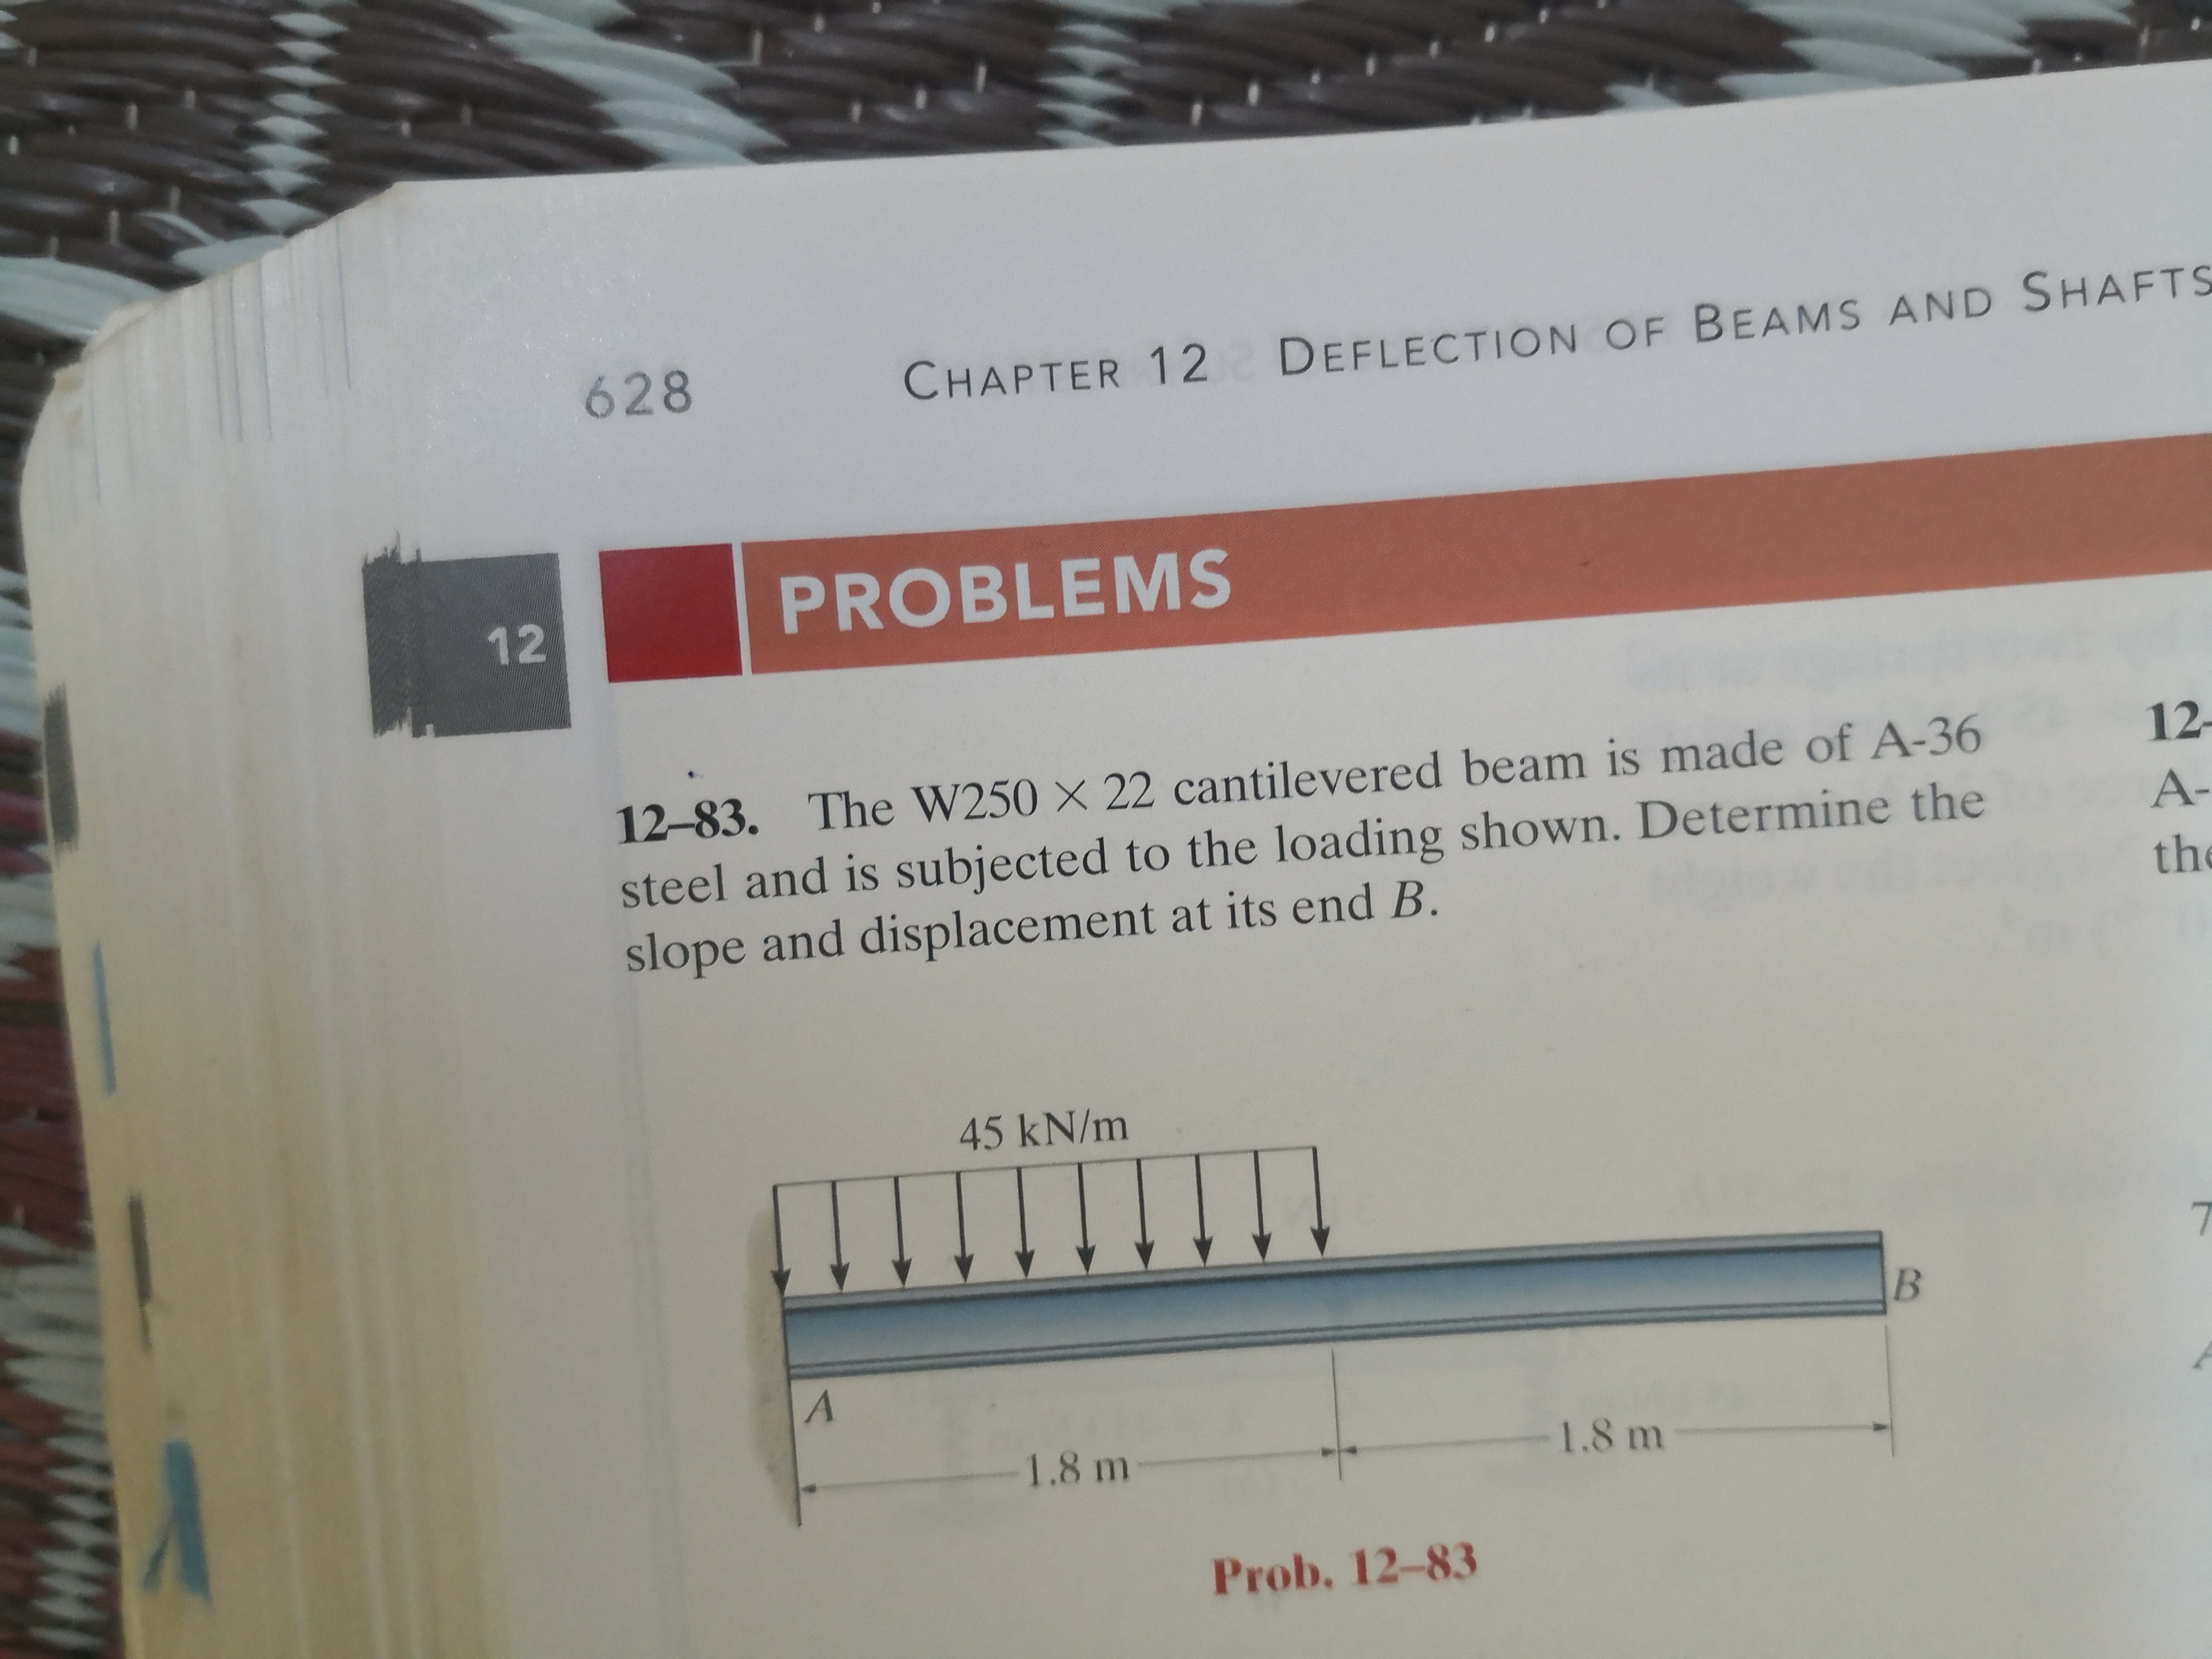 12-83. The W250 × 22 cantilevered beam is made of A-36
steel and is subjected to the loading shown. Determine the
slope and displacement at its end B.
